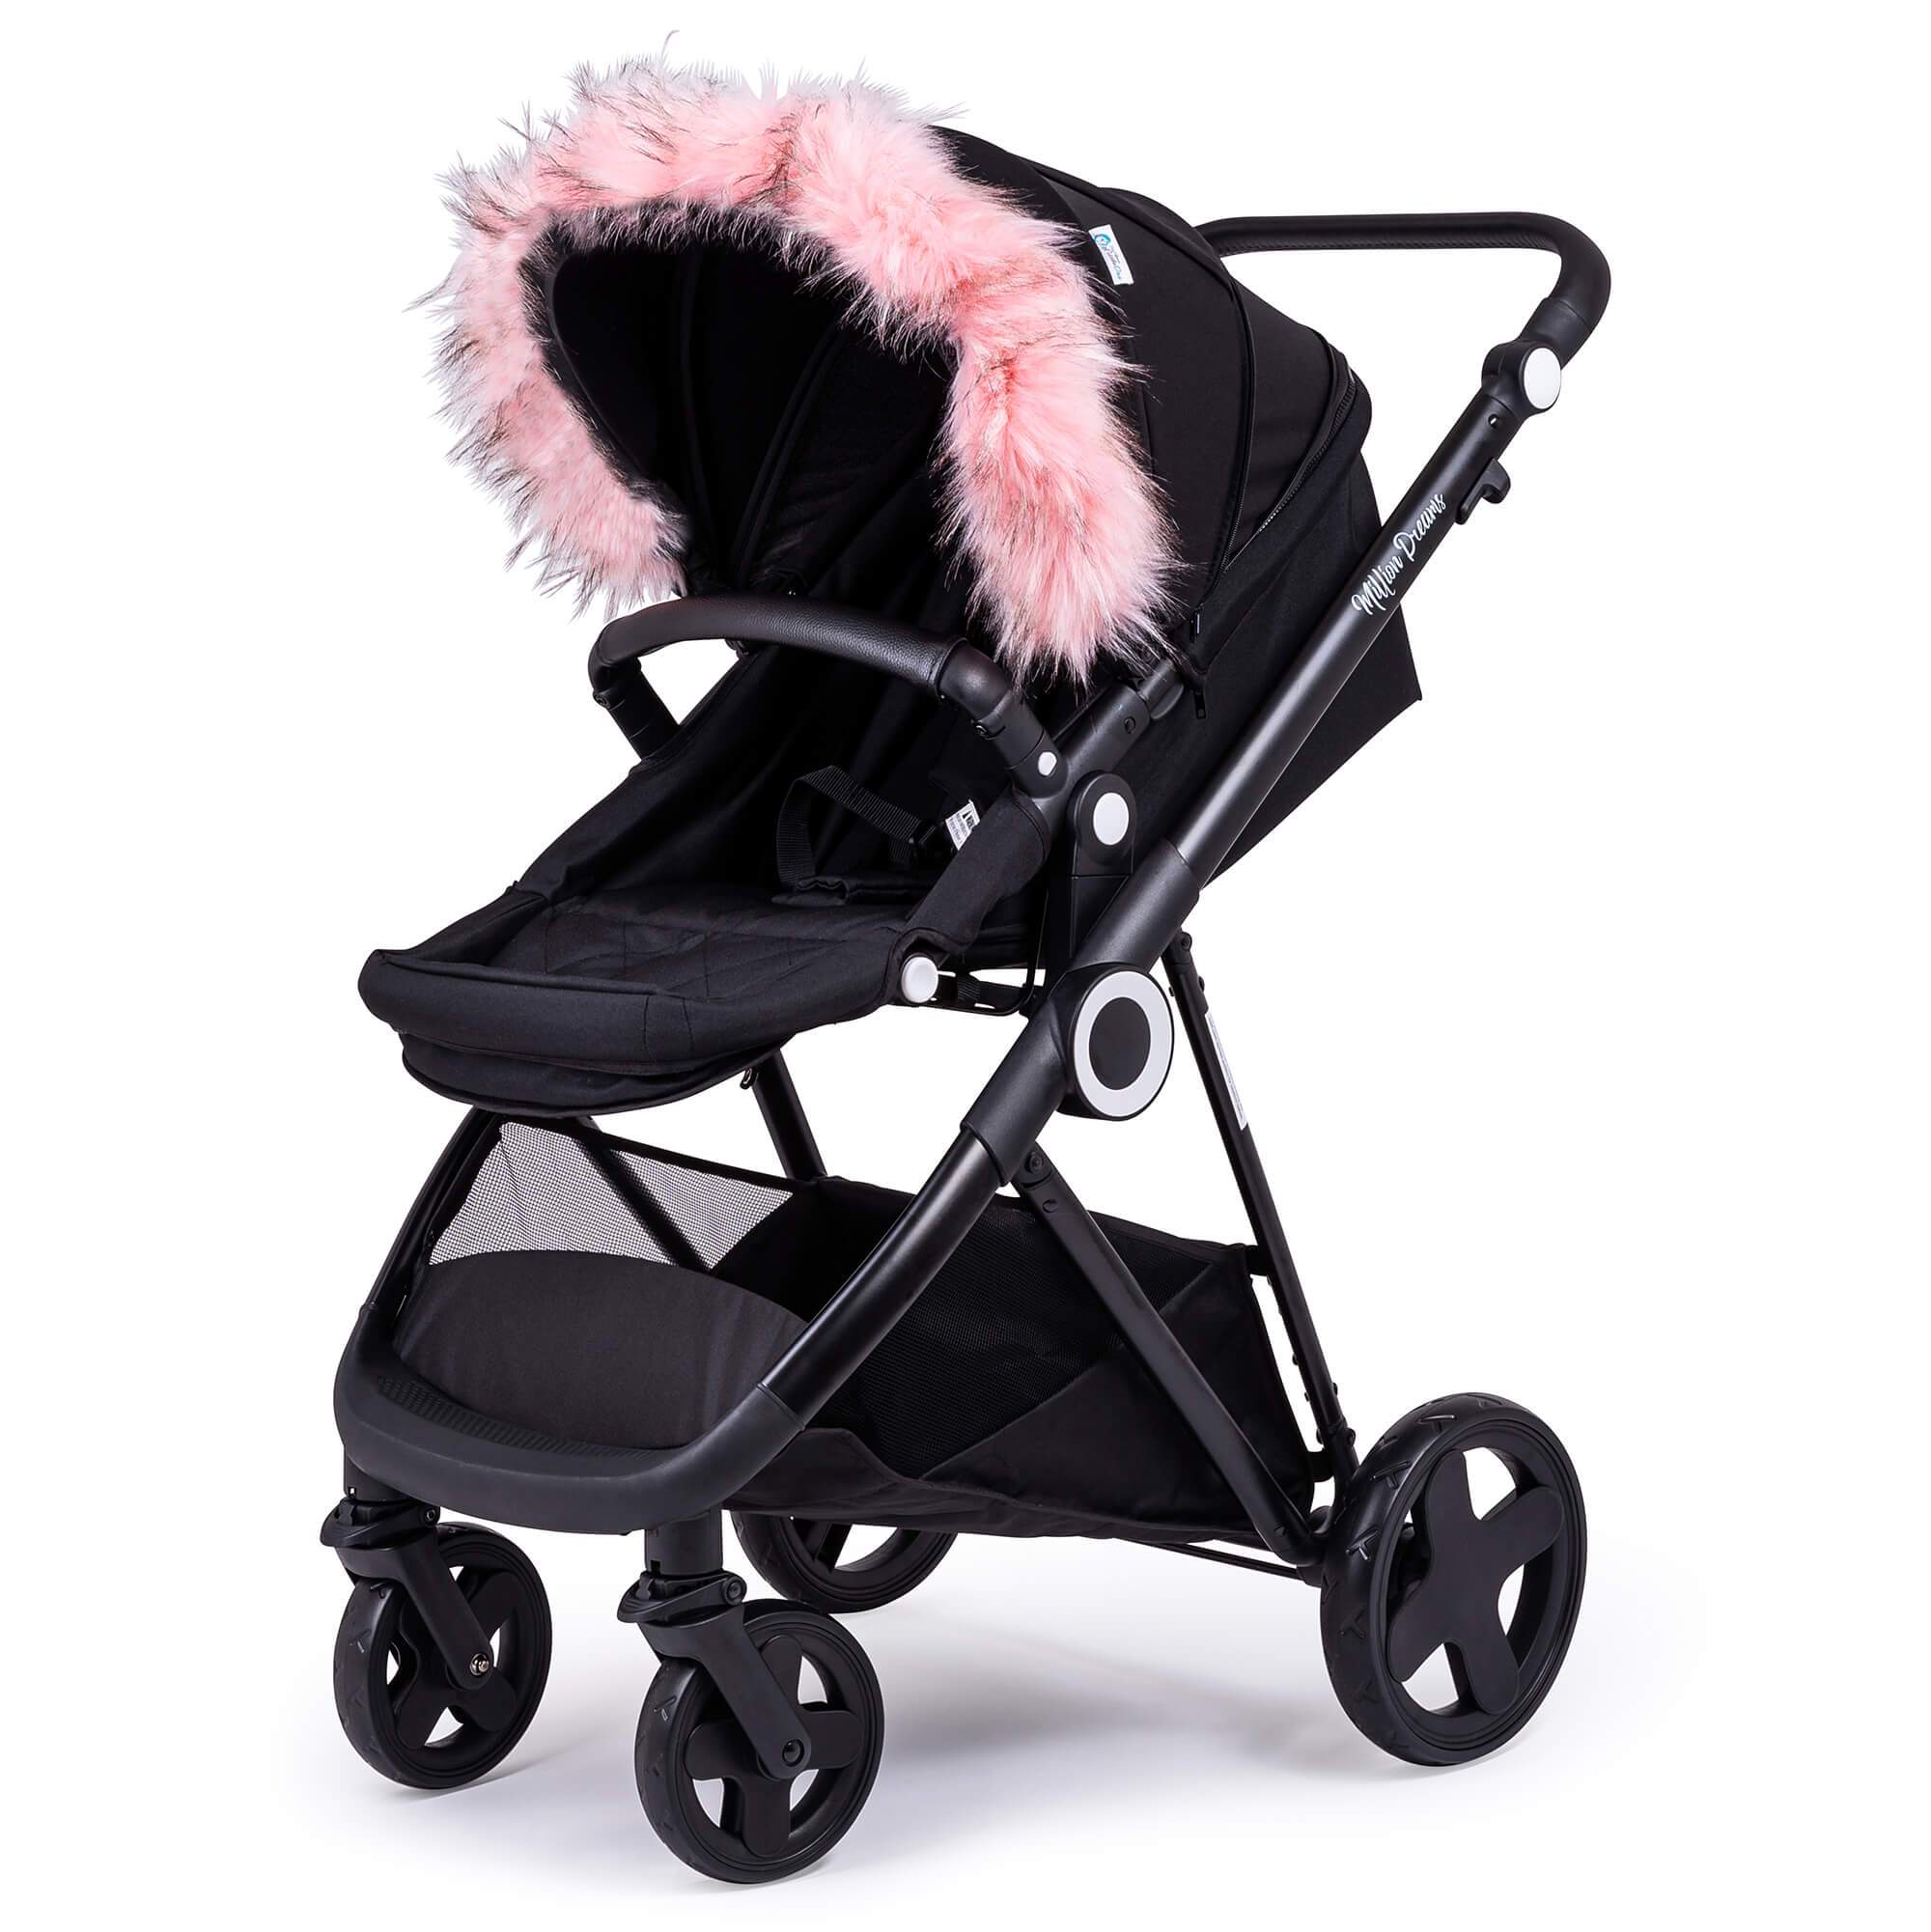 Pram Fur Hood Trim Attachment for Pushchair Compatible with Chicco - Light Pink / Fits All Models | For Your Little One